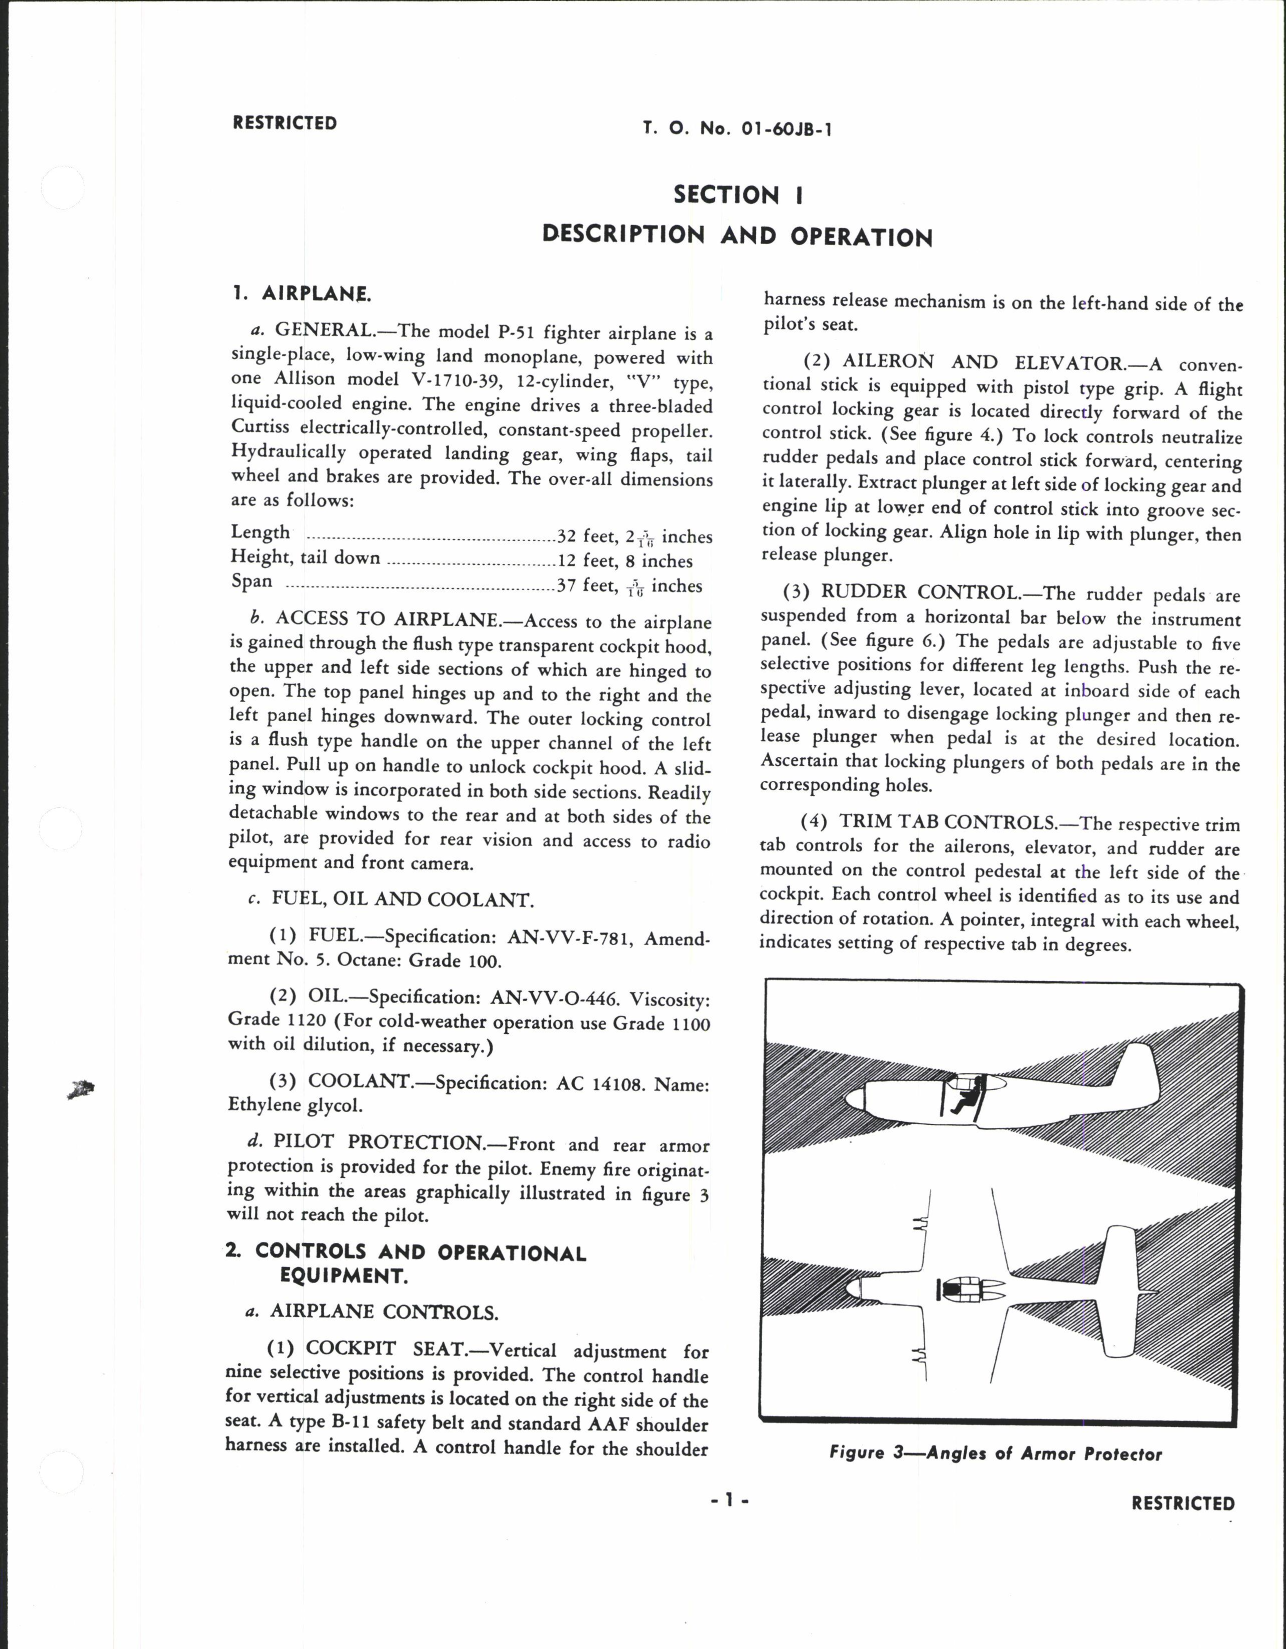 Sample page 7 from AirCorps Library document: Pilot's Handbook of Flight Operating Instructions for P-51 Airplane